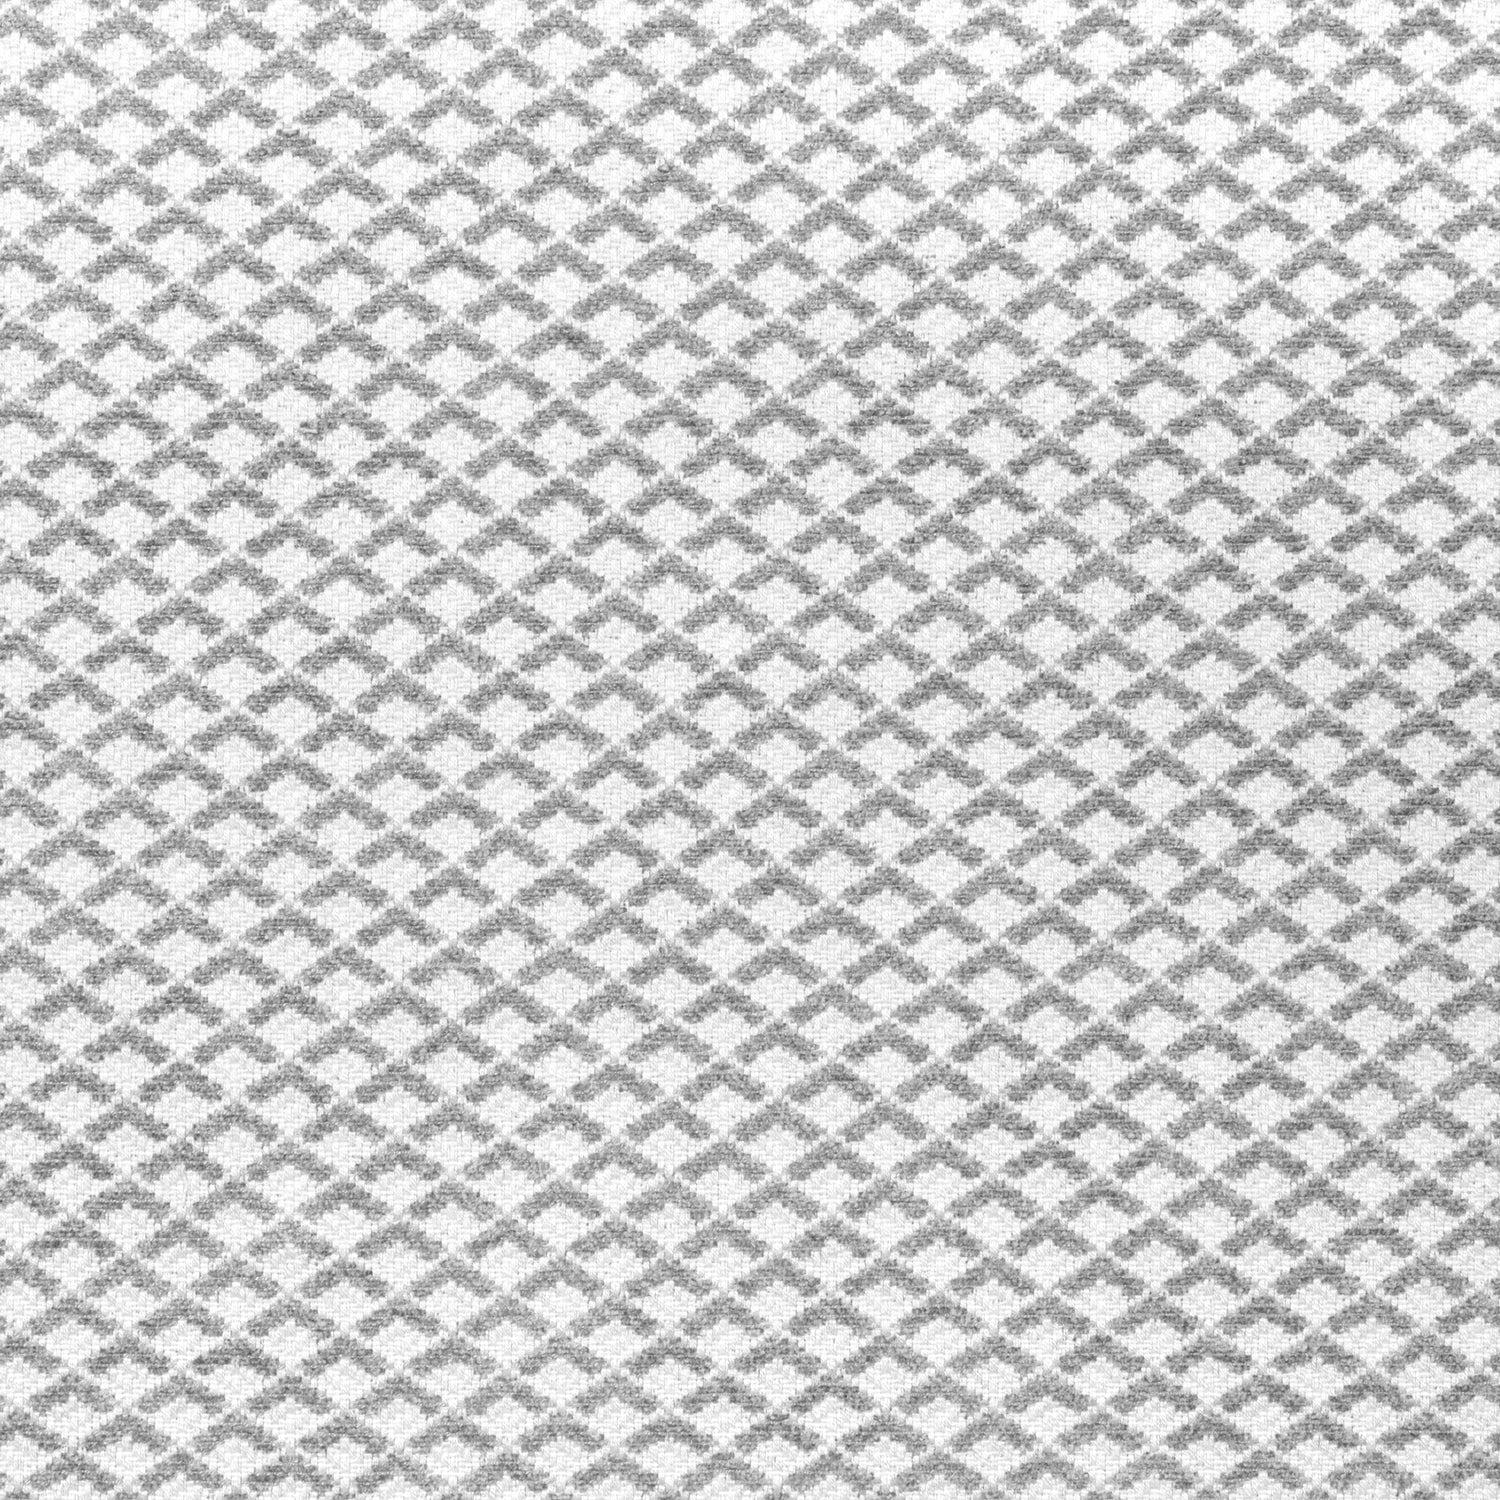 Scala fabric in sterling grey color - pattern number W80725 - by Thibaut in the Woven Resource 11: Rialto collection